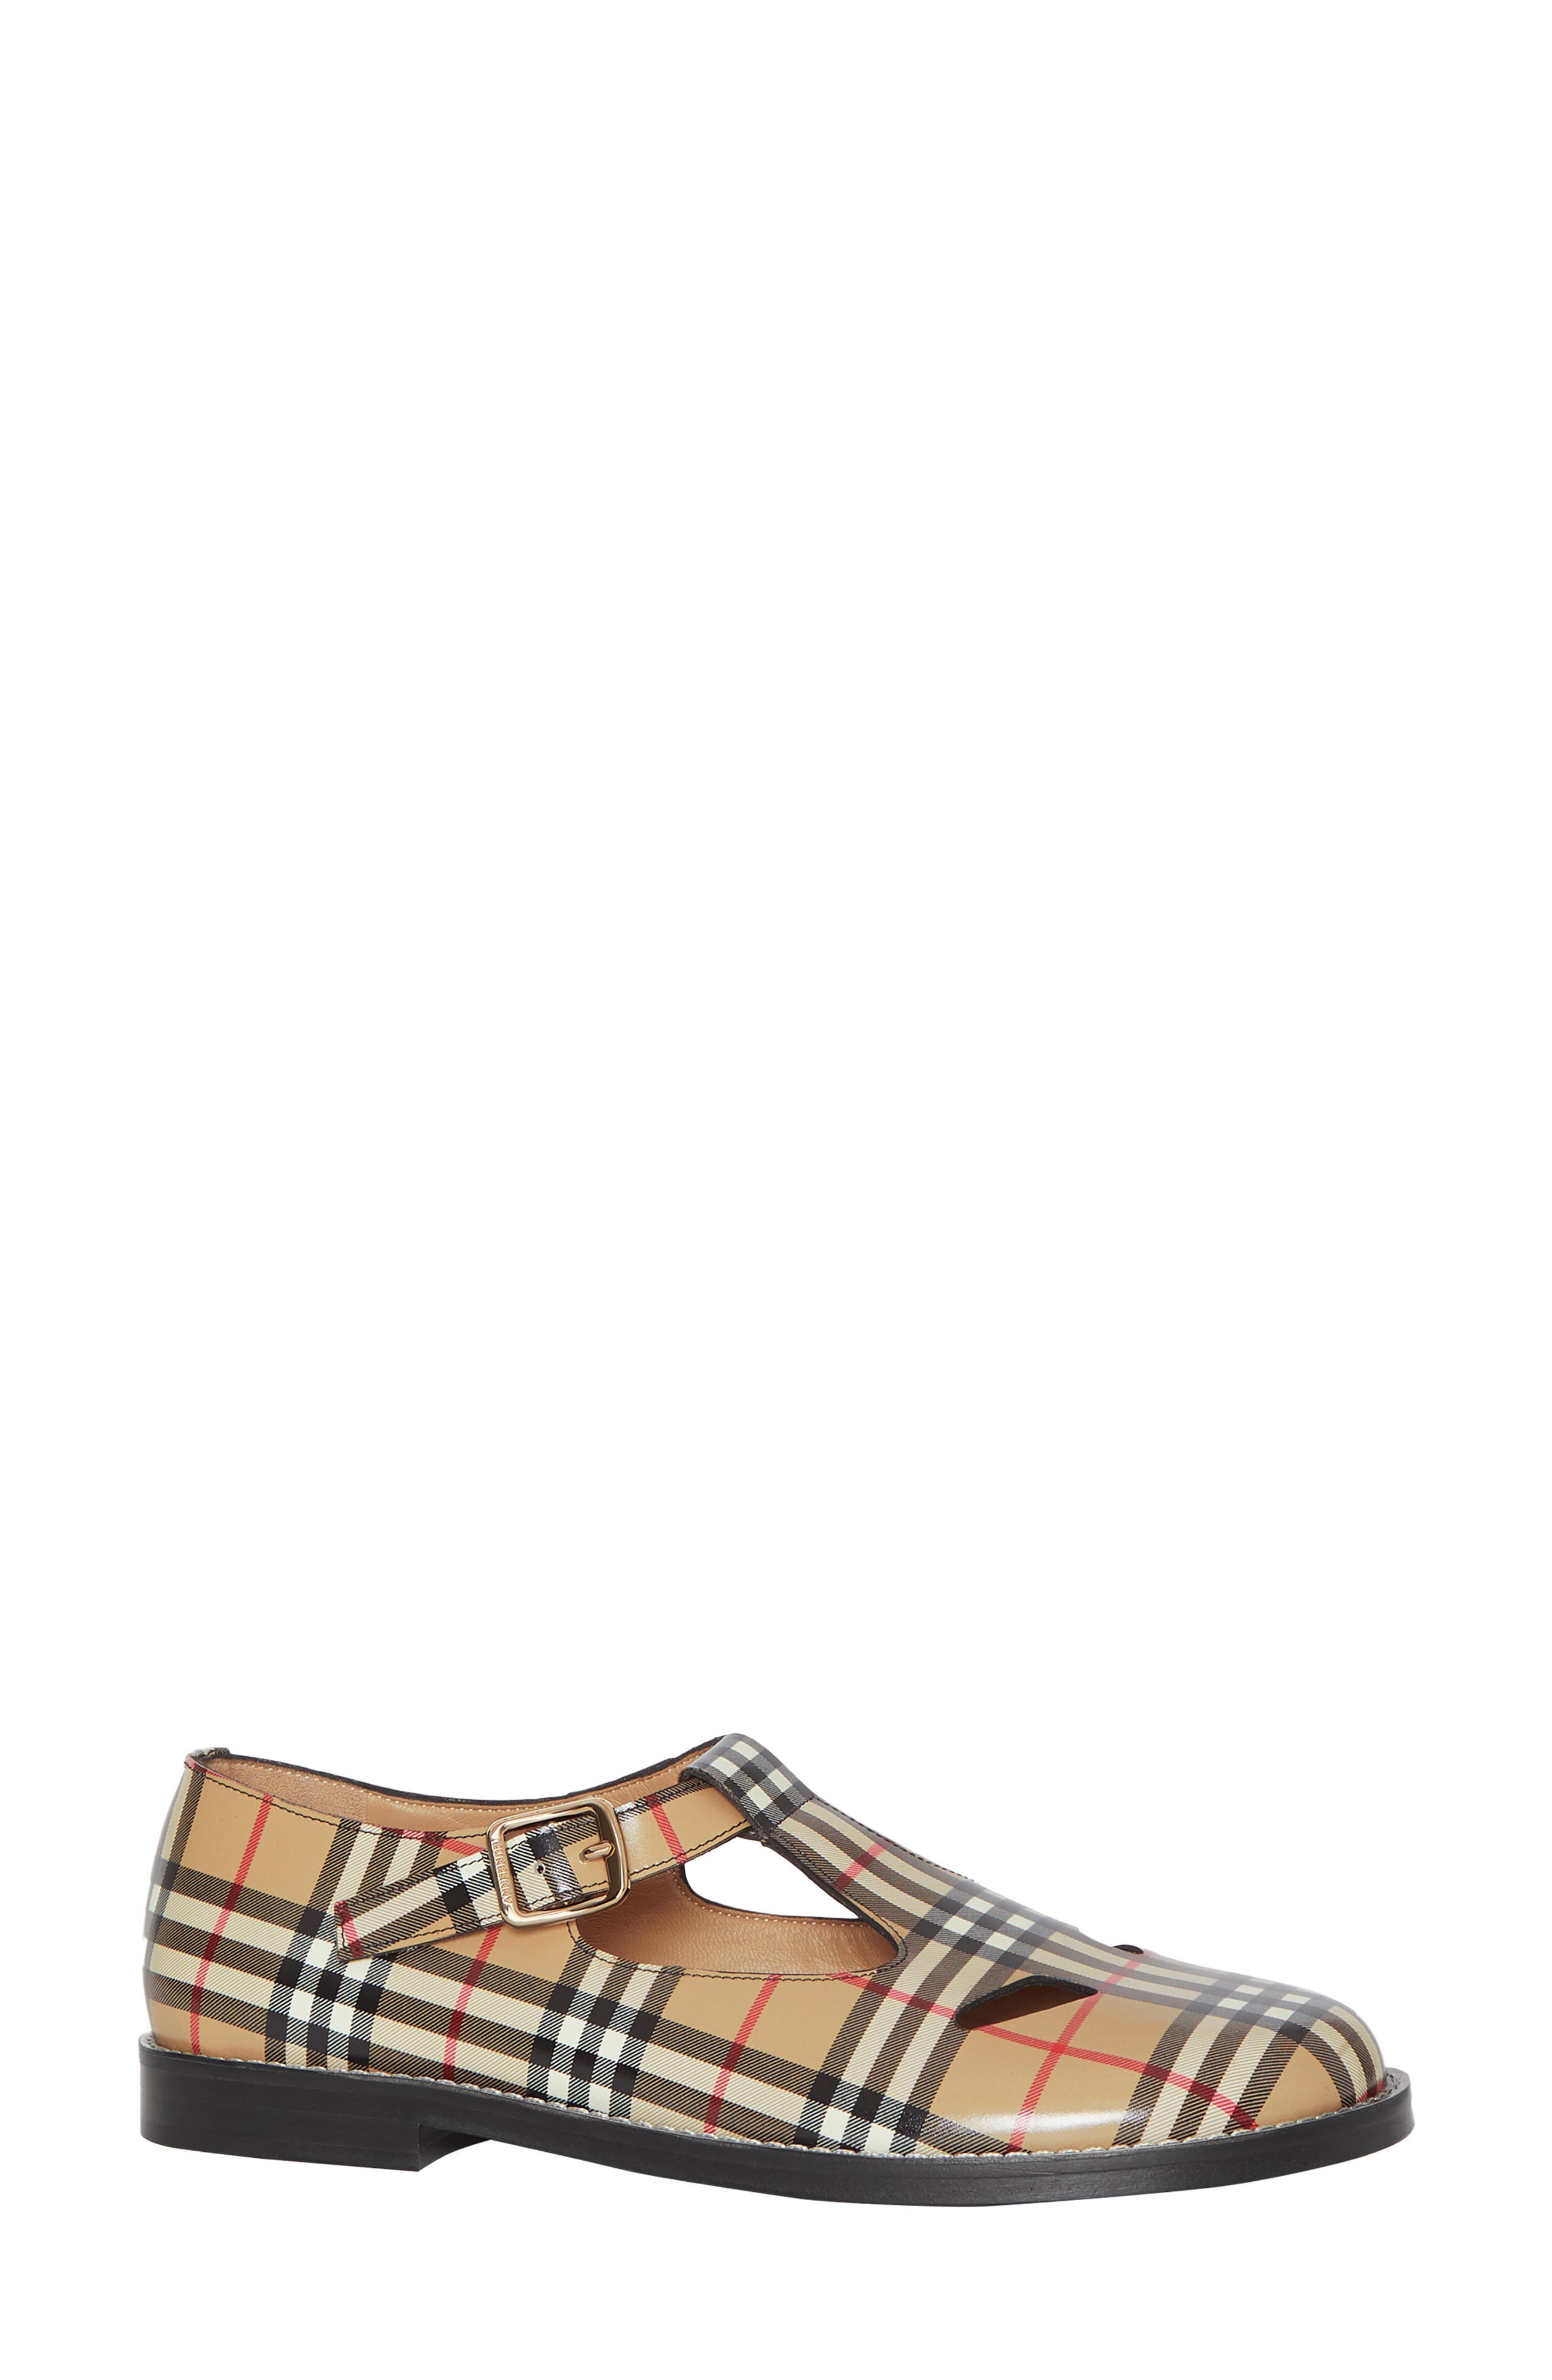 burberry mary janes